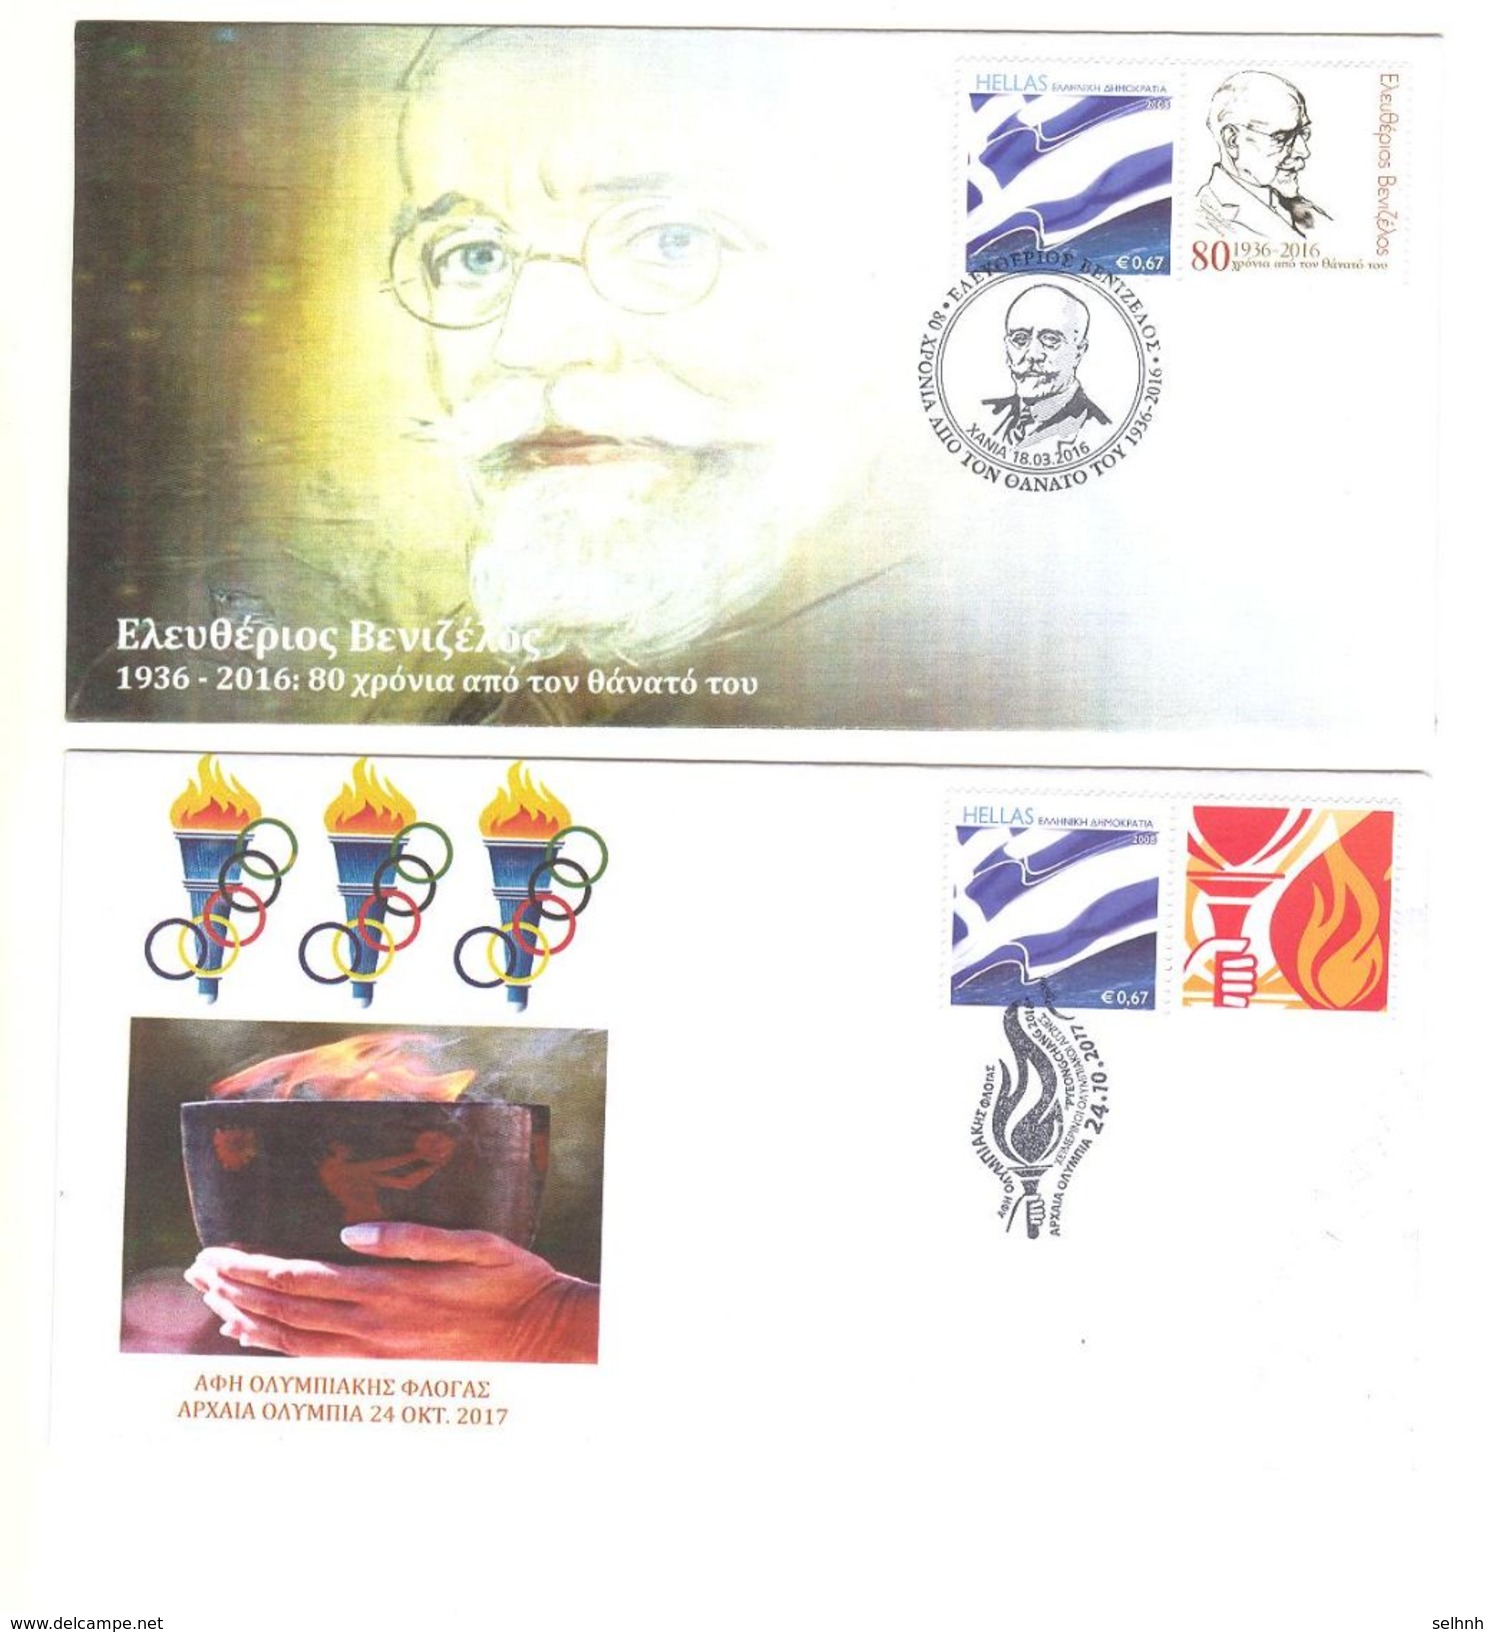 GREECE GRECE GREEK 8 COVERS WITH COMMEMORATIVE POSTMARKS AND VIGNETTES OF 2016 AND 2017 - Flammes & Oblitérations